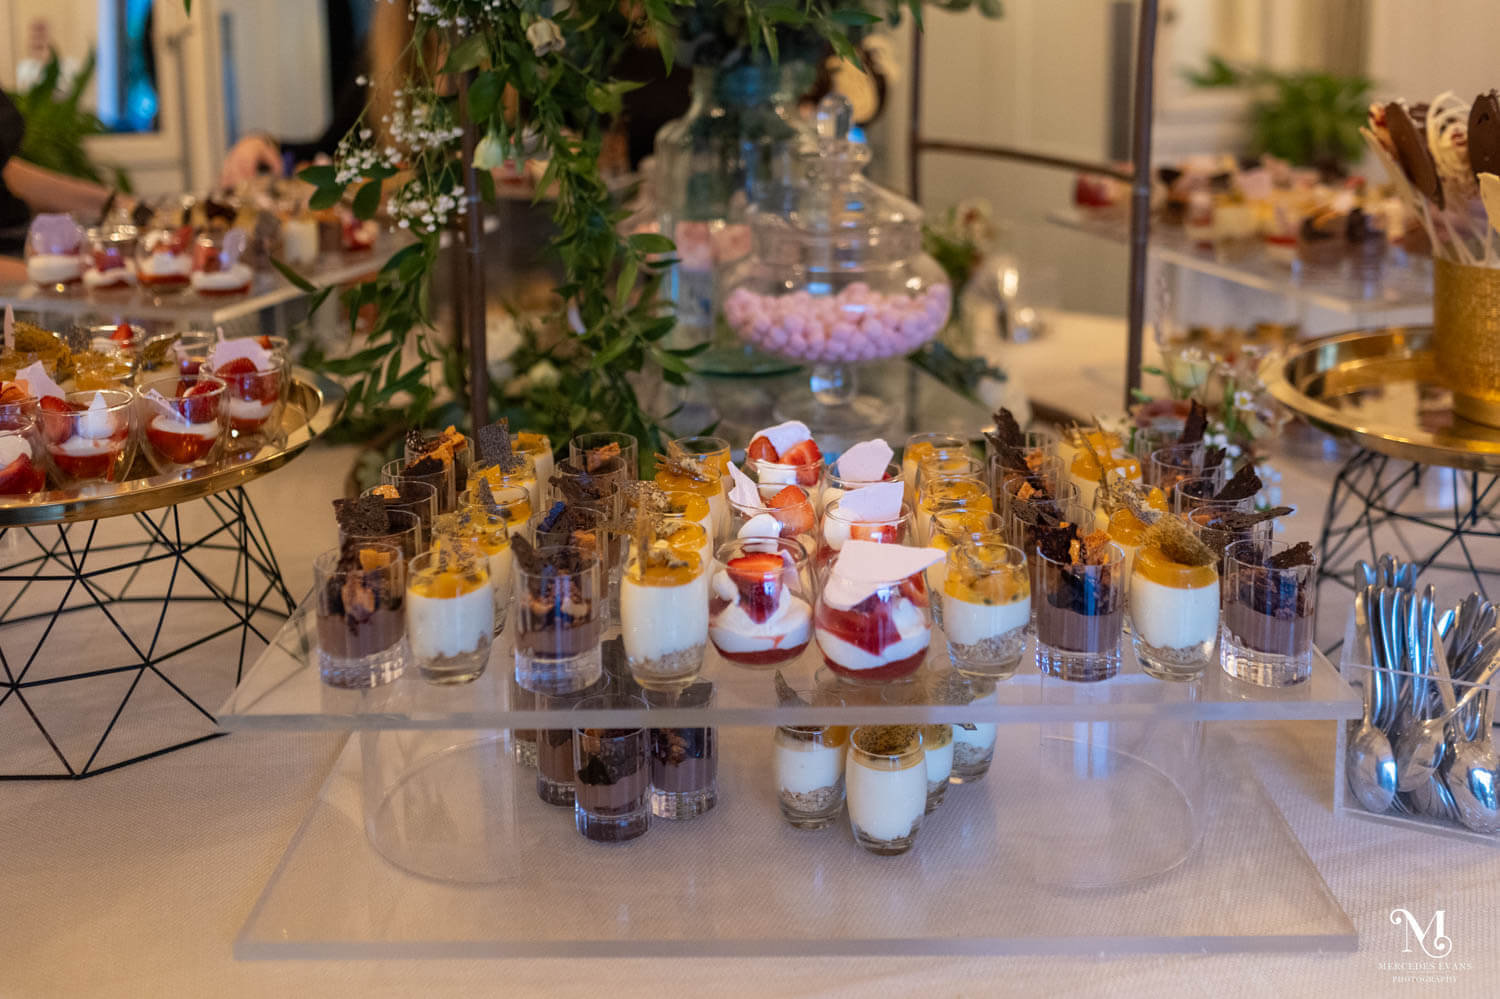 multiple rows of individual puddings in glasses are displayed, with bonbons and chocolate lollipops